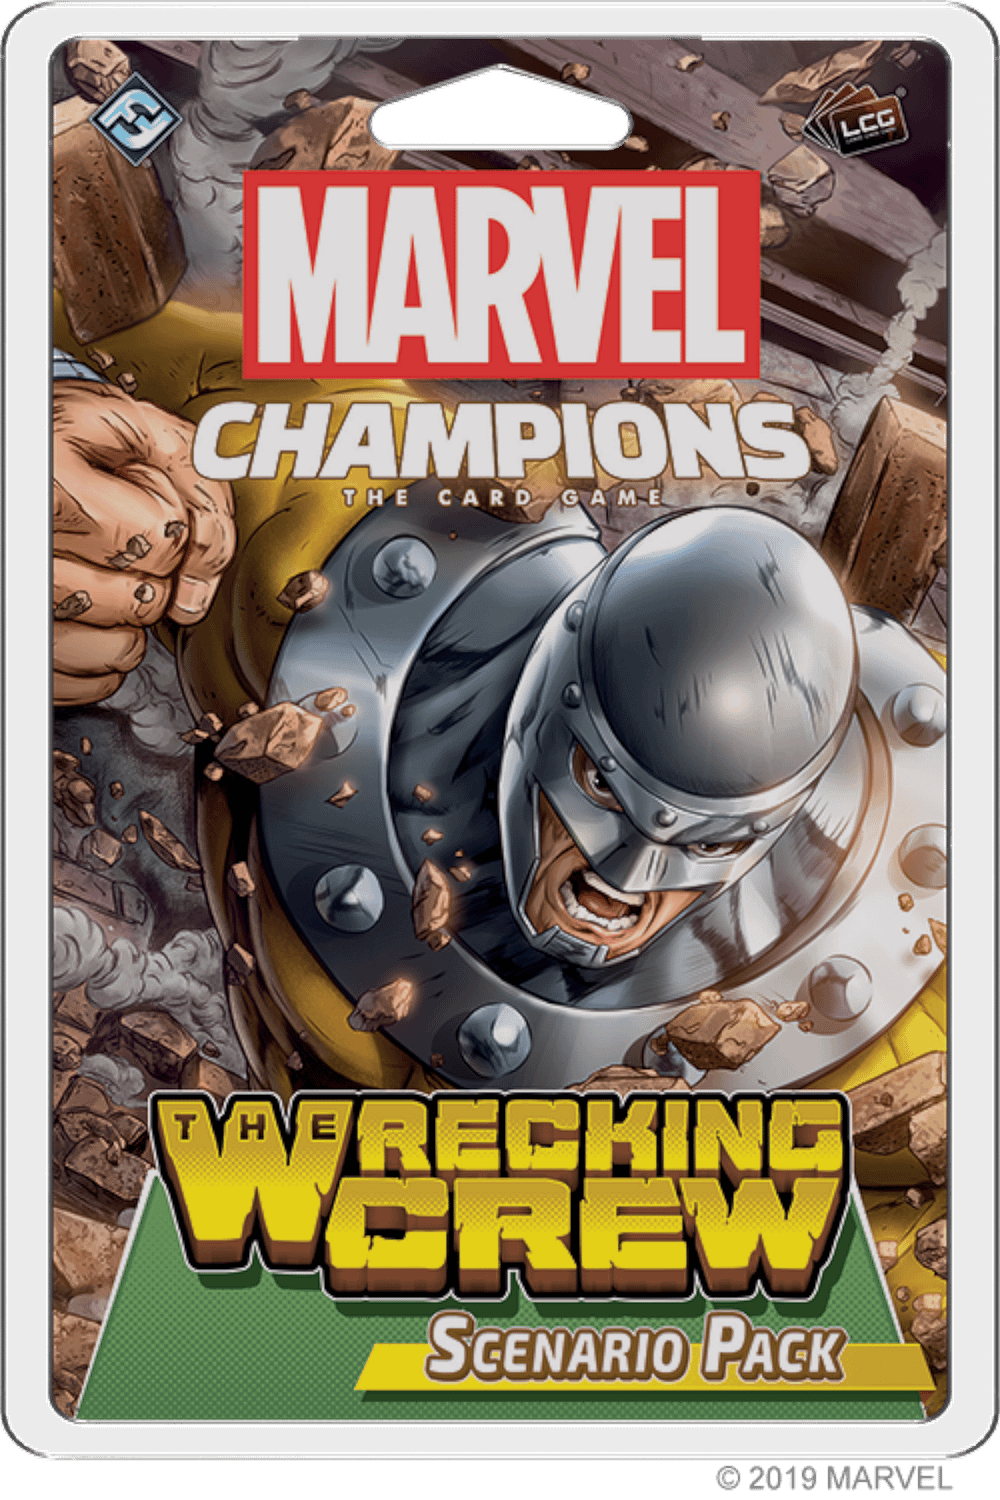 "Marvel Champions" Card Game is About to Get Wrecked